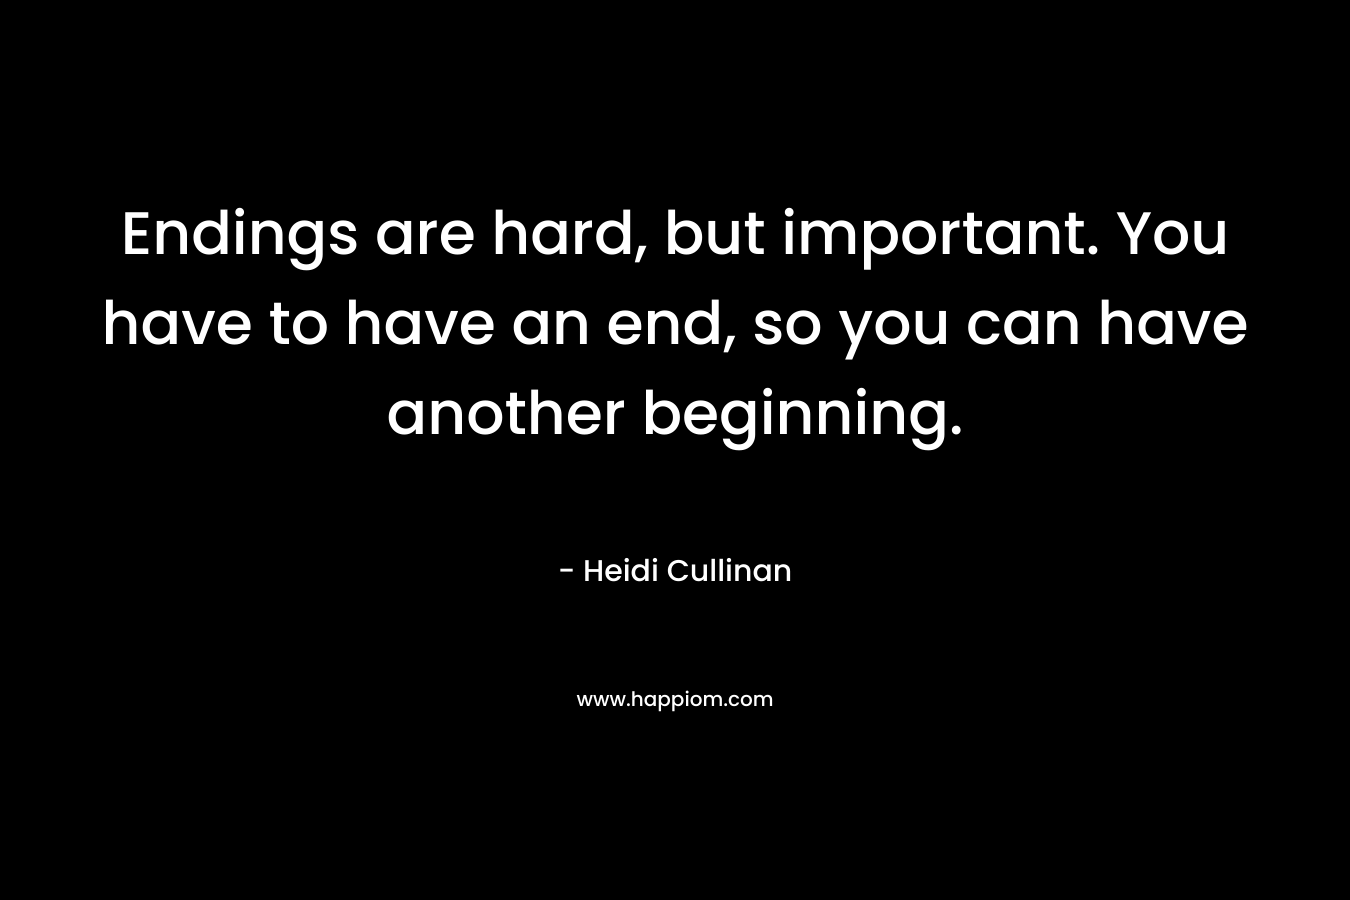 Endings are hard, but important. You have to have an end, so you can have another beginning. – Heidi Cullinan